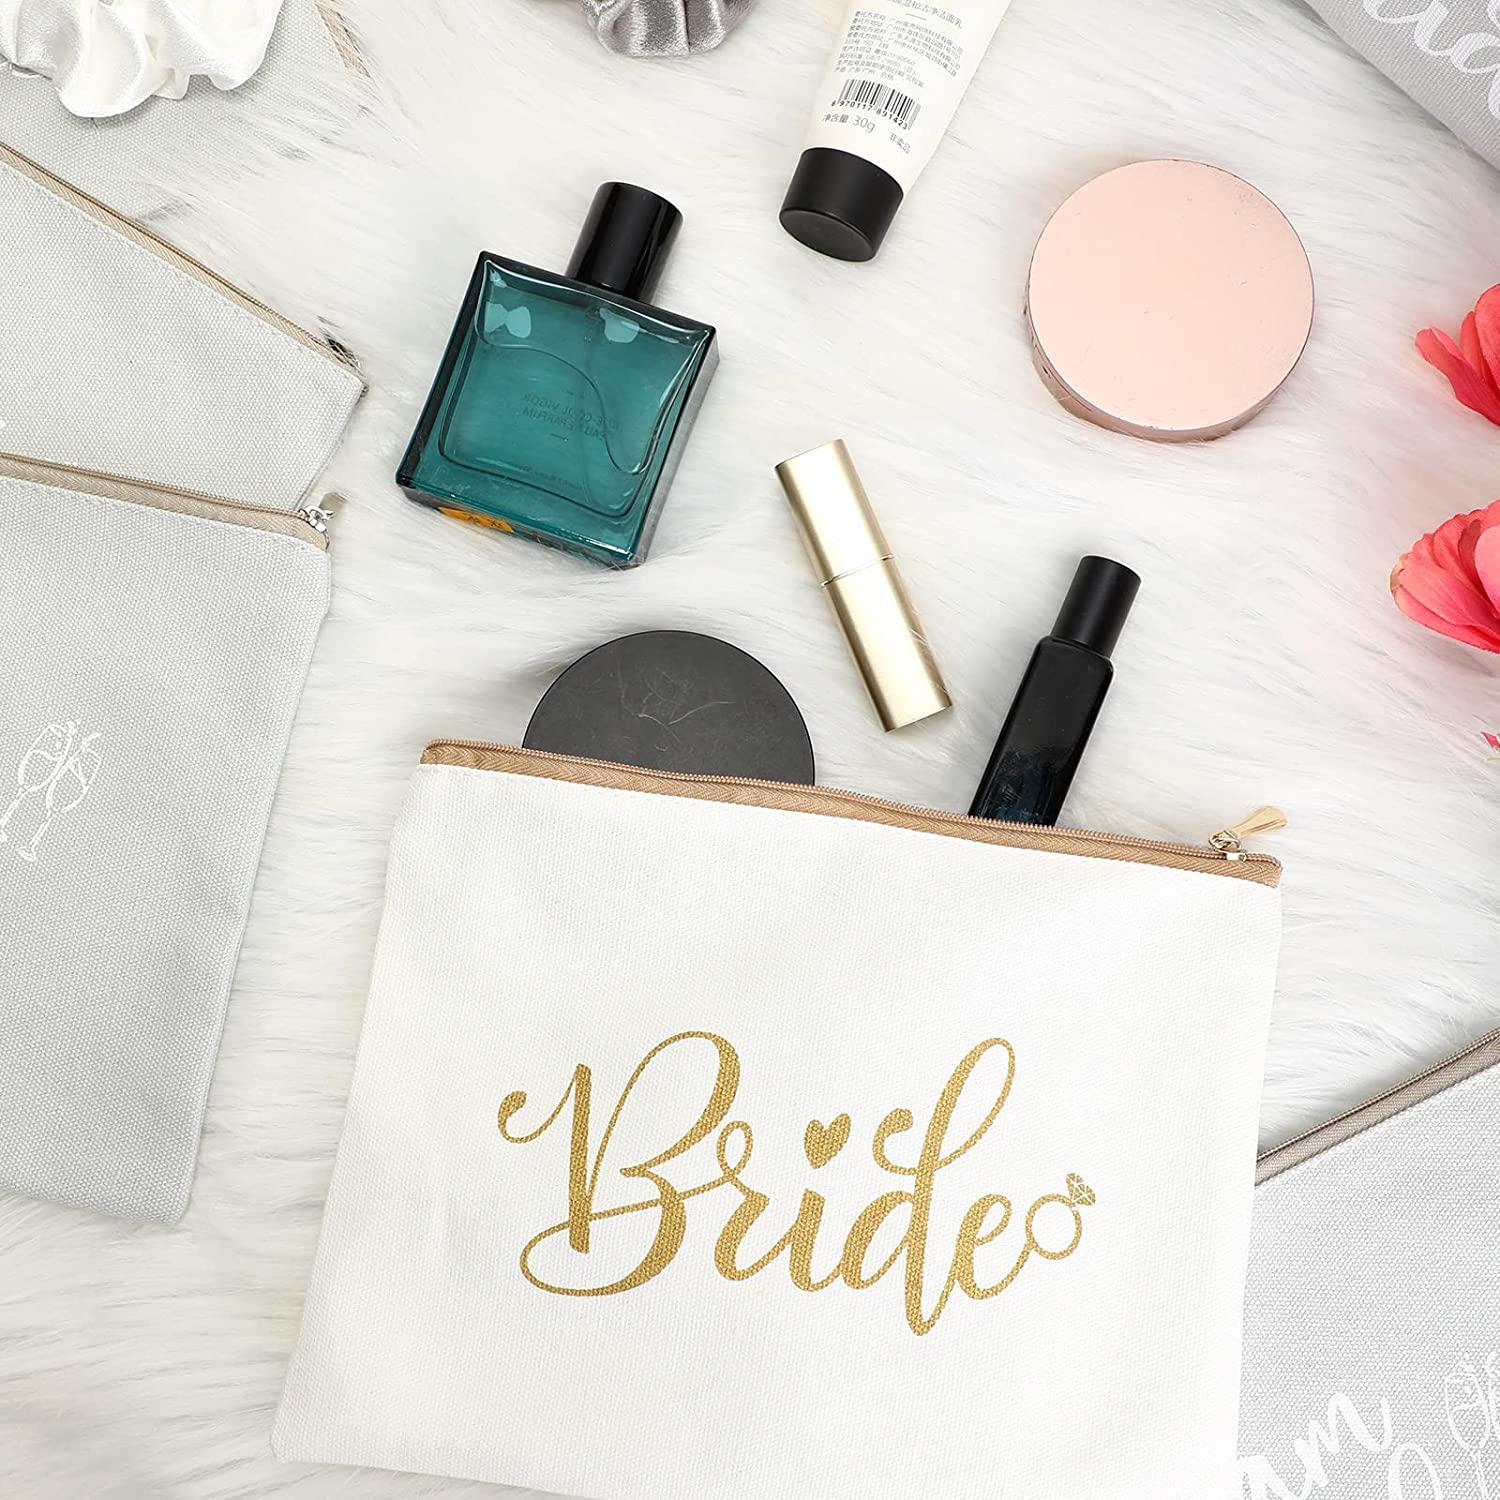 24 Pieces Bride Gift Bridesmaid Bachelorette Proposal Gift Wedding Themed  Supplies, 8 Brides Bridesmaid Makeup Bags 8 Hair Scrunchies Bridal Satin  Hair Ties 8 Wedding Cards (Silver, Gold,Cute Style) Silver, Gold Cute Style